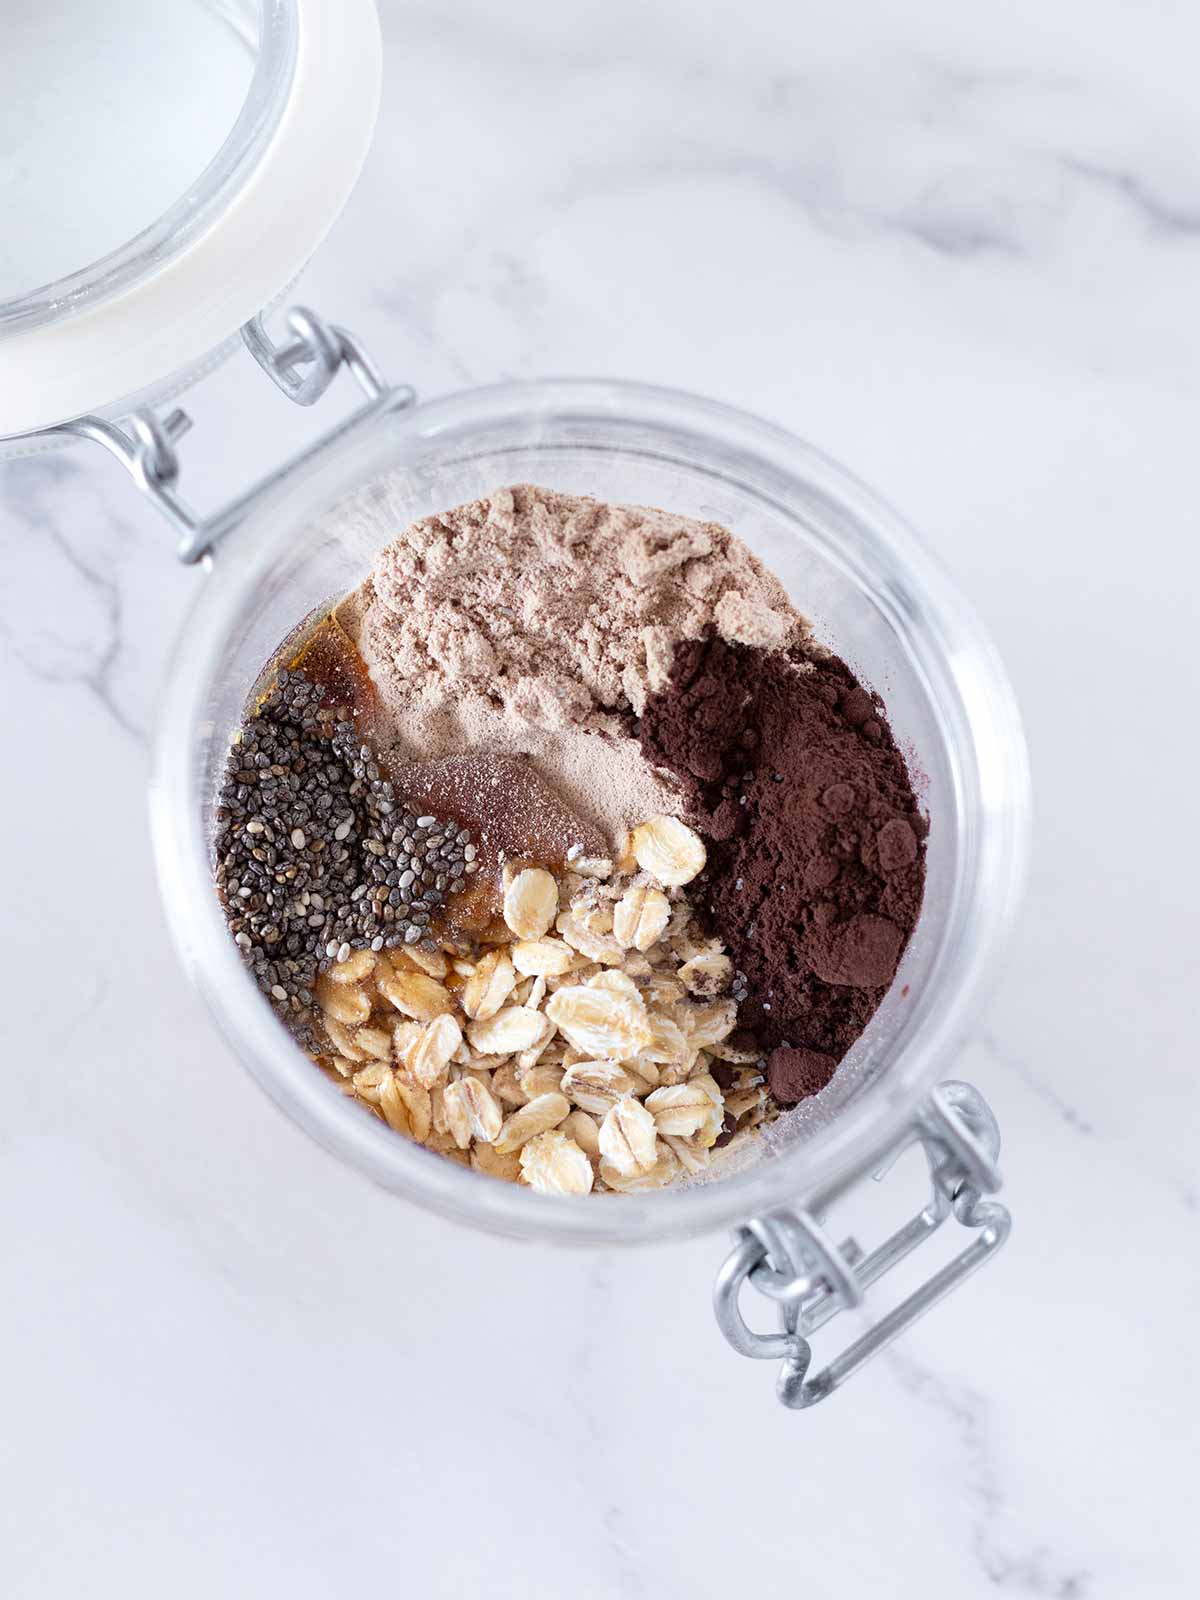 Simple ingredients for high protein proats (overnight oats) in a small jar.